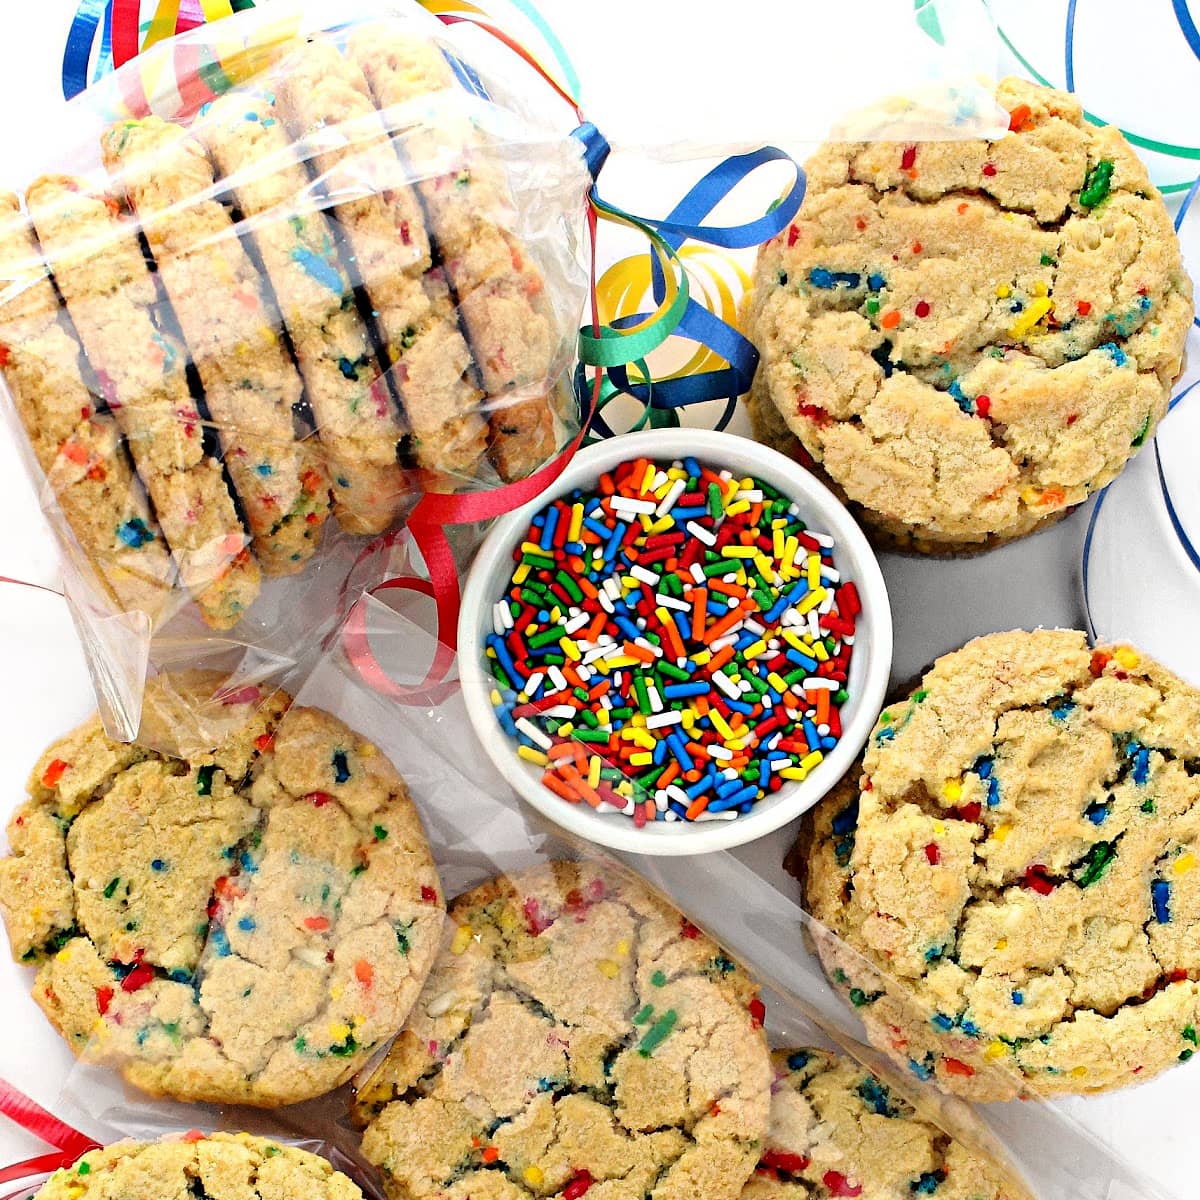 Closeup of Confetti Cookies with sprinkles in the dough being packaged in cellophane bags.